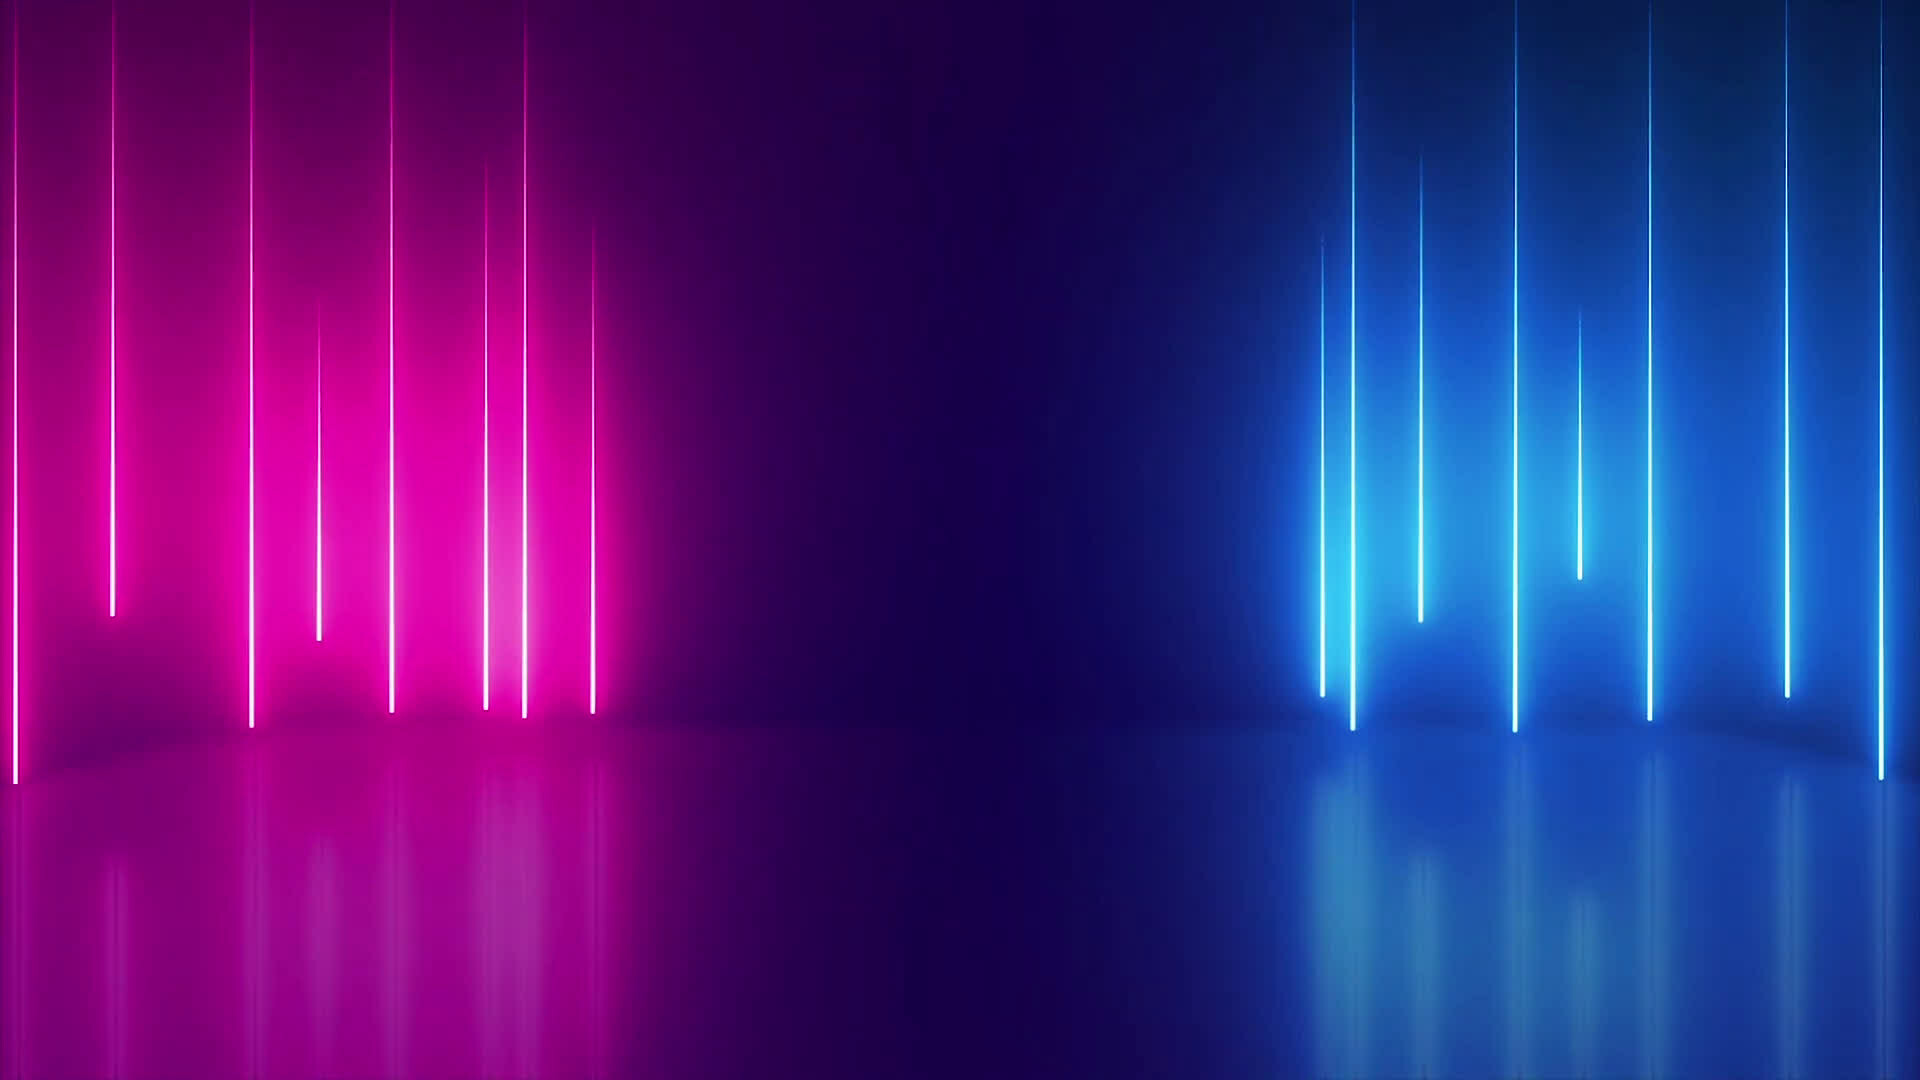 Neon: Colors can be used to create bold and eye-catching sceneries. 1920x1080 Full HD Background.